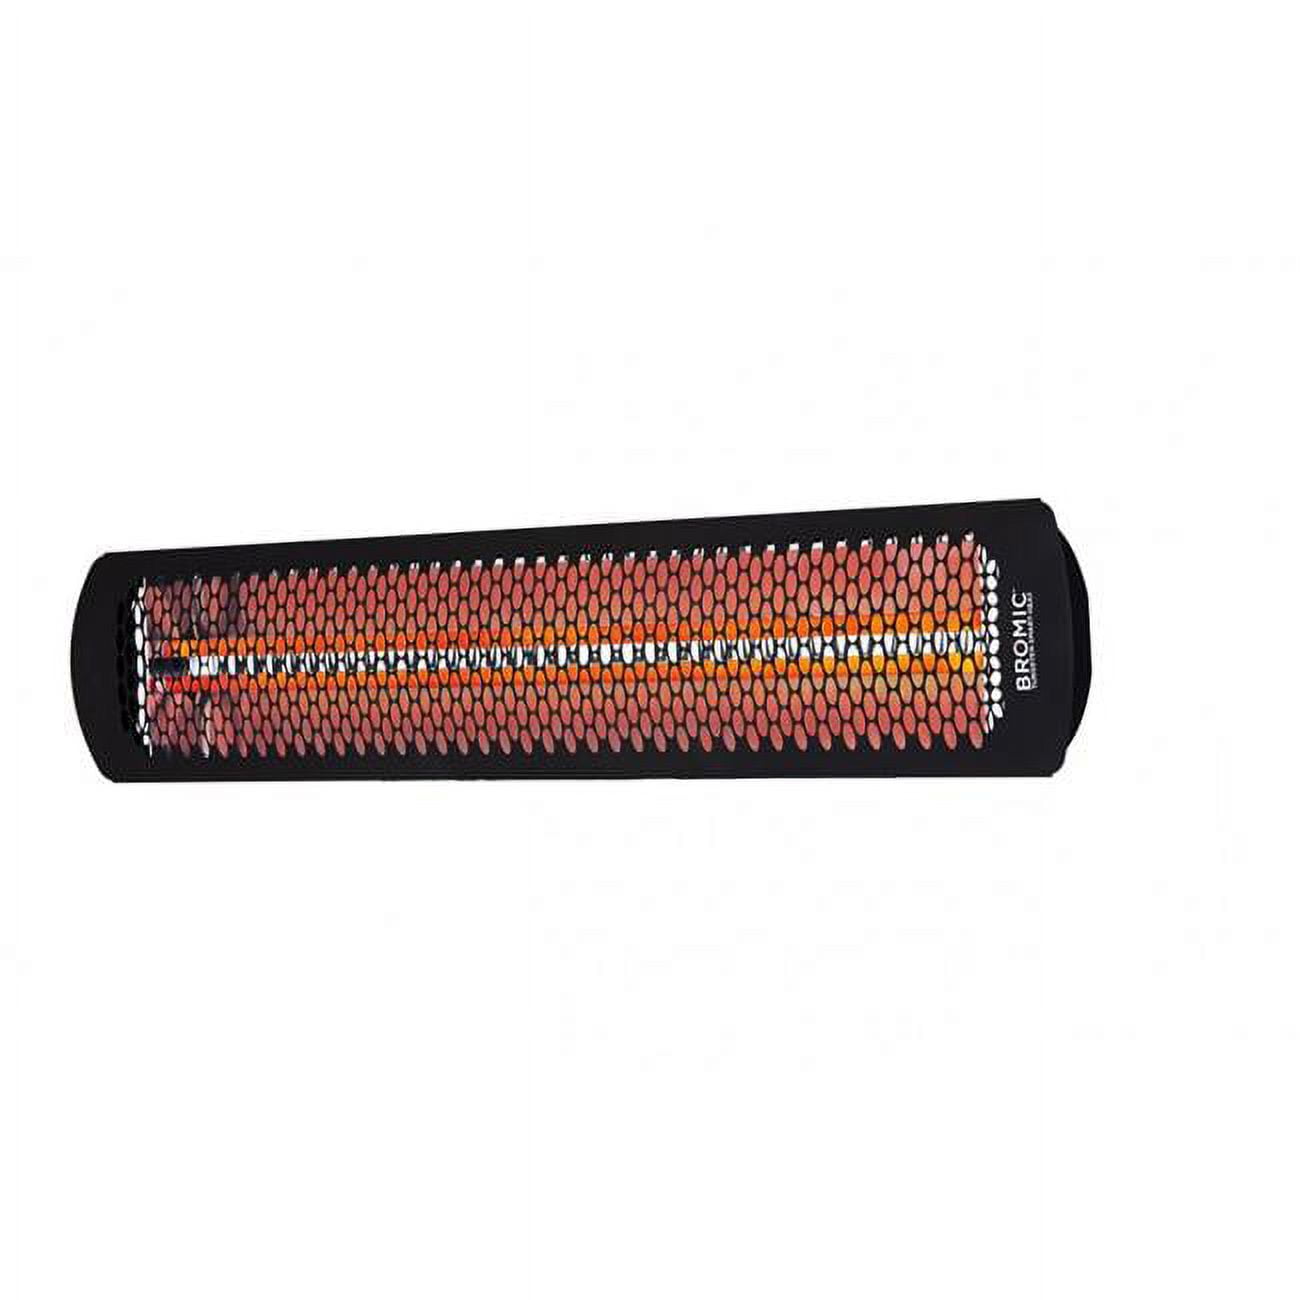 Picture of Bromic BH0420032 4000W Tungsten Smart Heat Electric Outdoor Patio Heater, Black